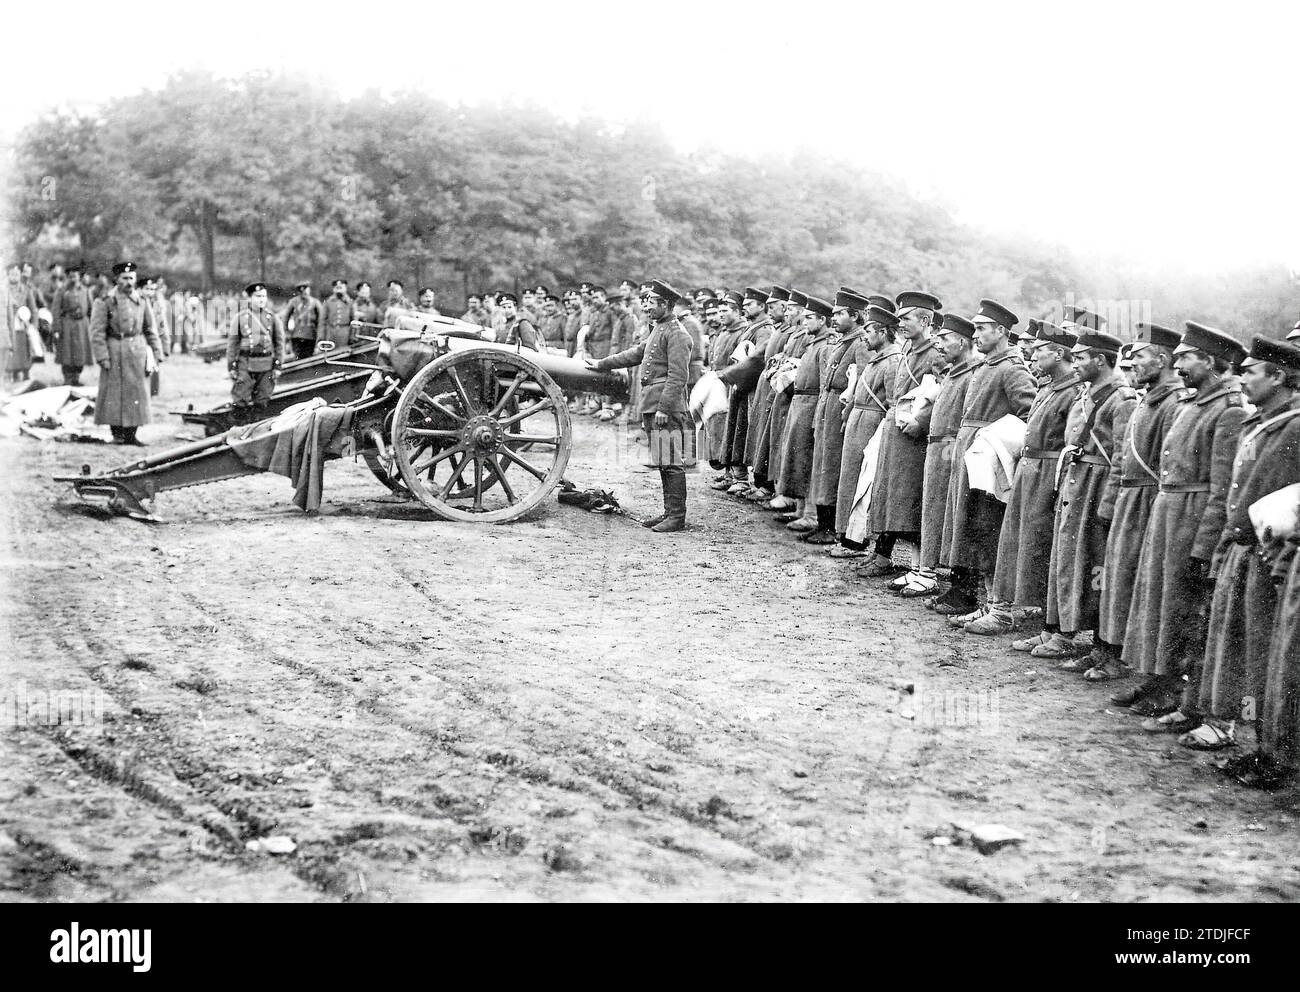 09/30/1915. From the Bulgarian army. An artillery regiment reviewing before setting off to the Serbian border. Credit: Album / Archivo ABC / Charles Chusseau Flaviens Stock Photo